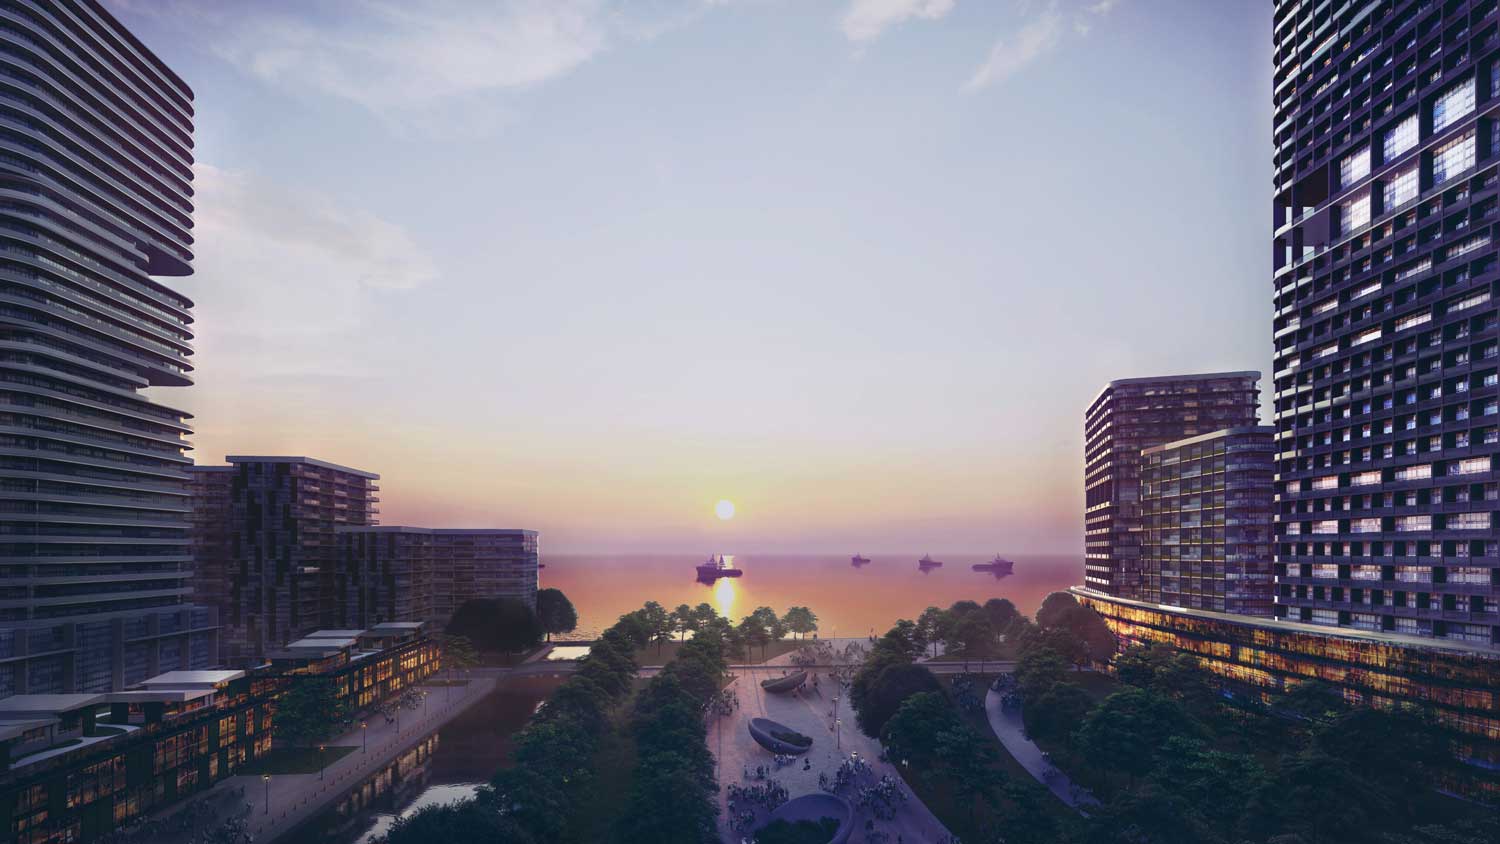 Horizon Manila with the Manila Bay Sunset view - The three islands of the 419 hectare Horizon Manila project is planned to encompass a vast diversity of communities that all function together as a complete city